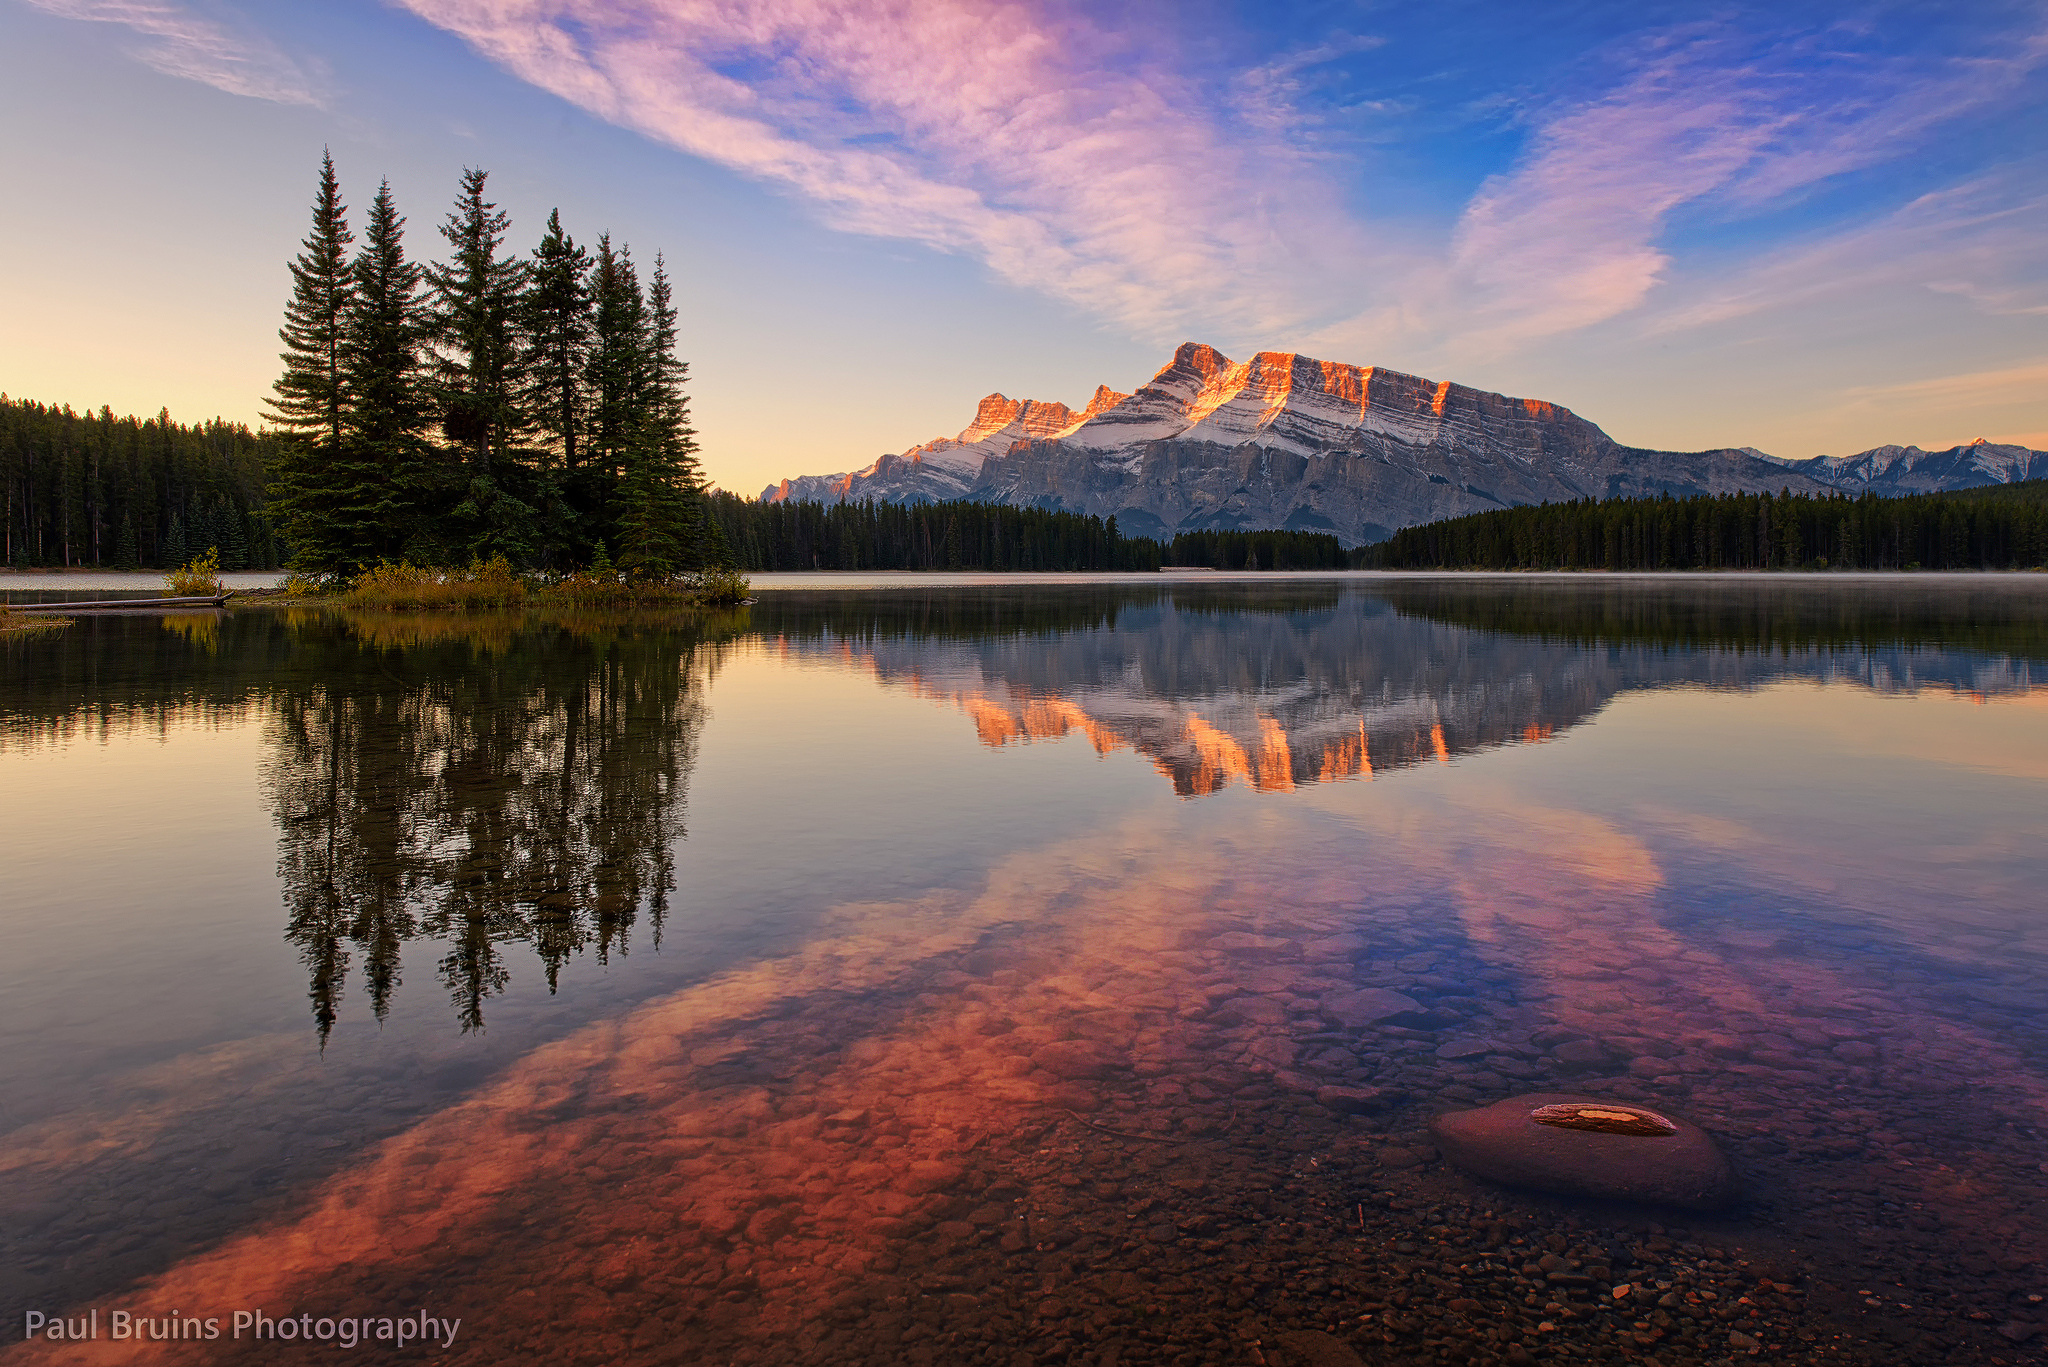 General 2048x1367 Canada Banff Banff National Park Mount Rundle mountains landscape nature trees lake Alberta water reflection clouds watermarked